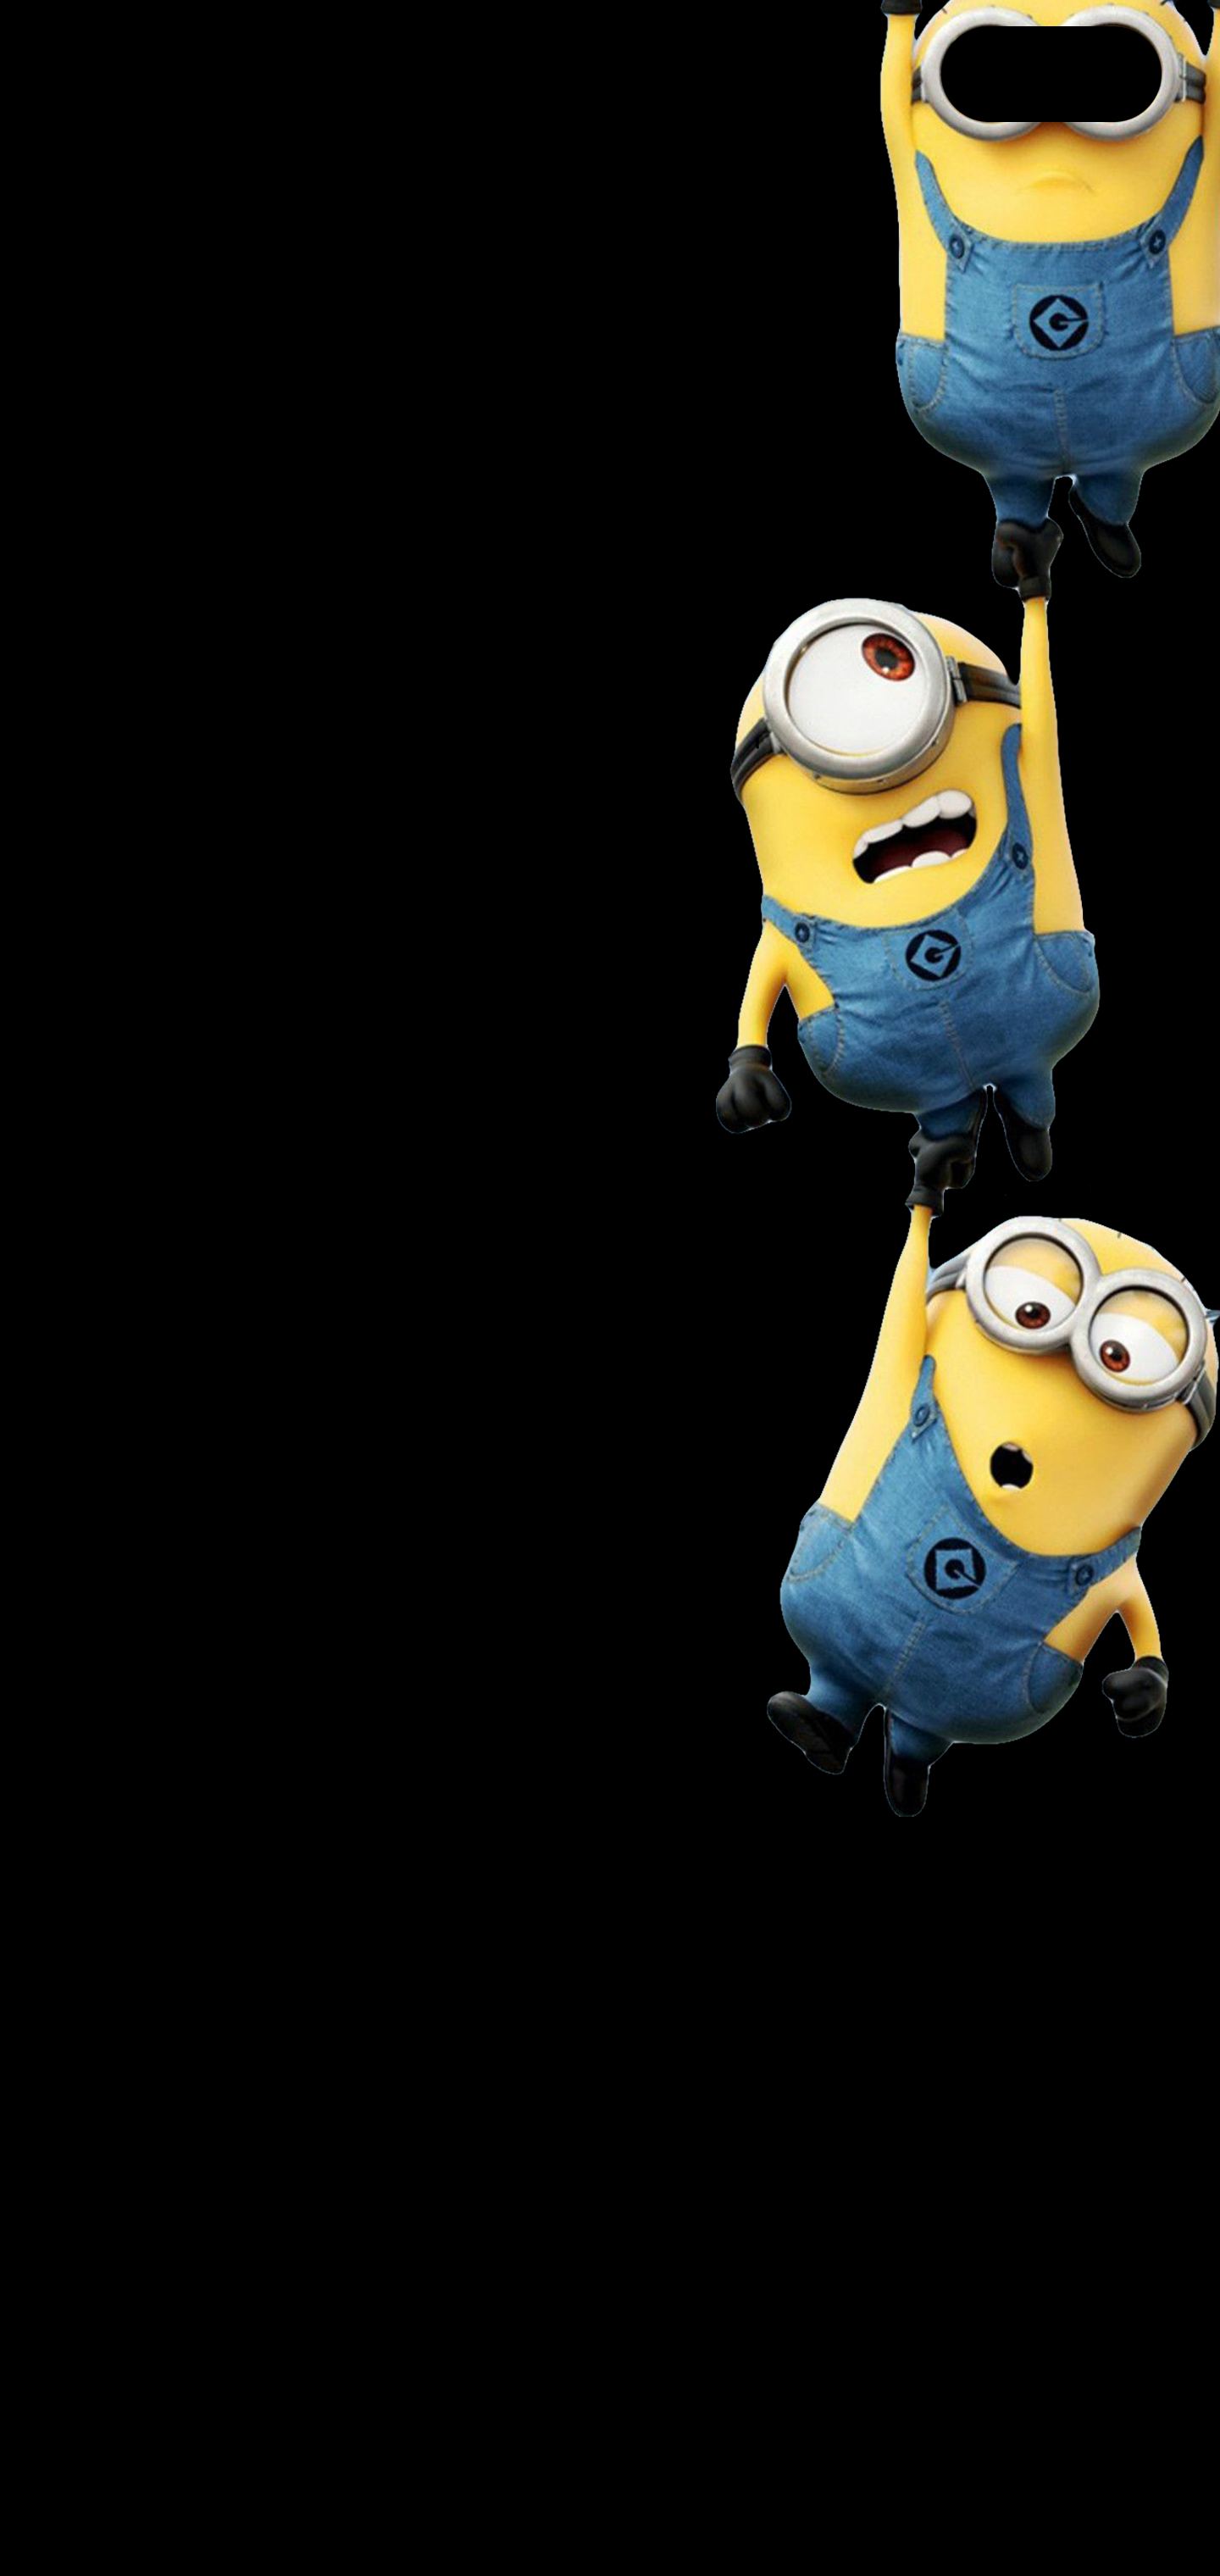 Minion Phone Wallpaper 84 images